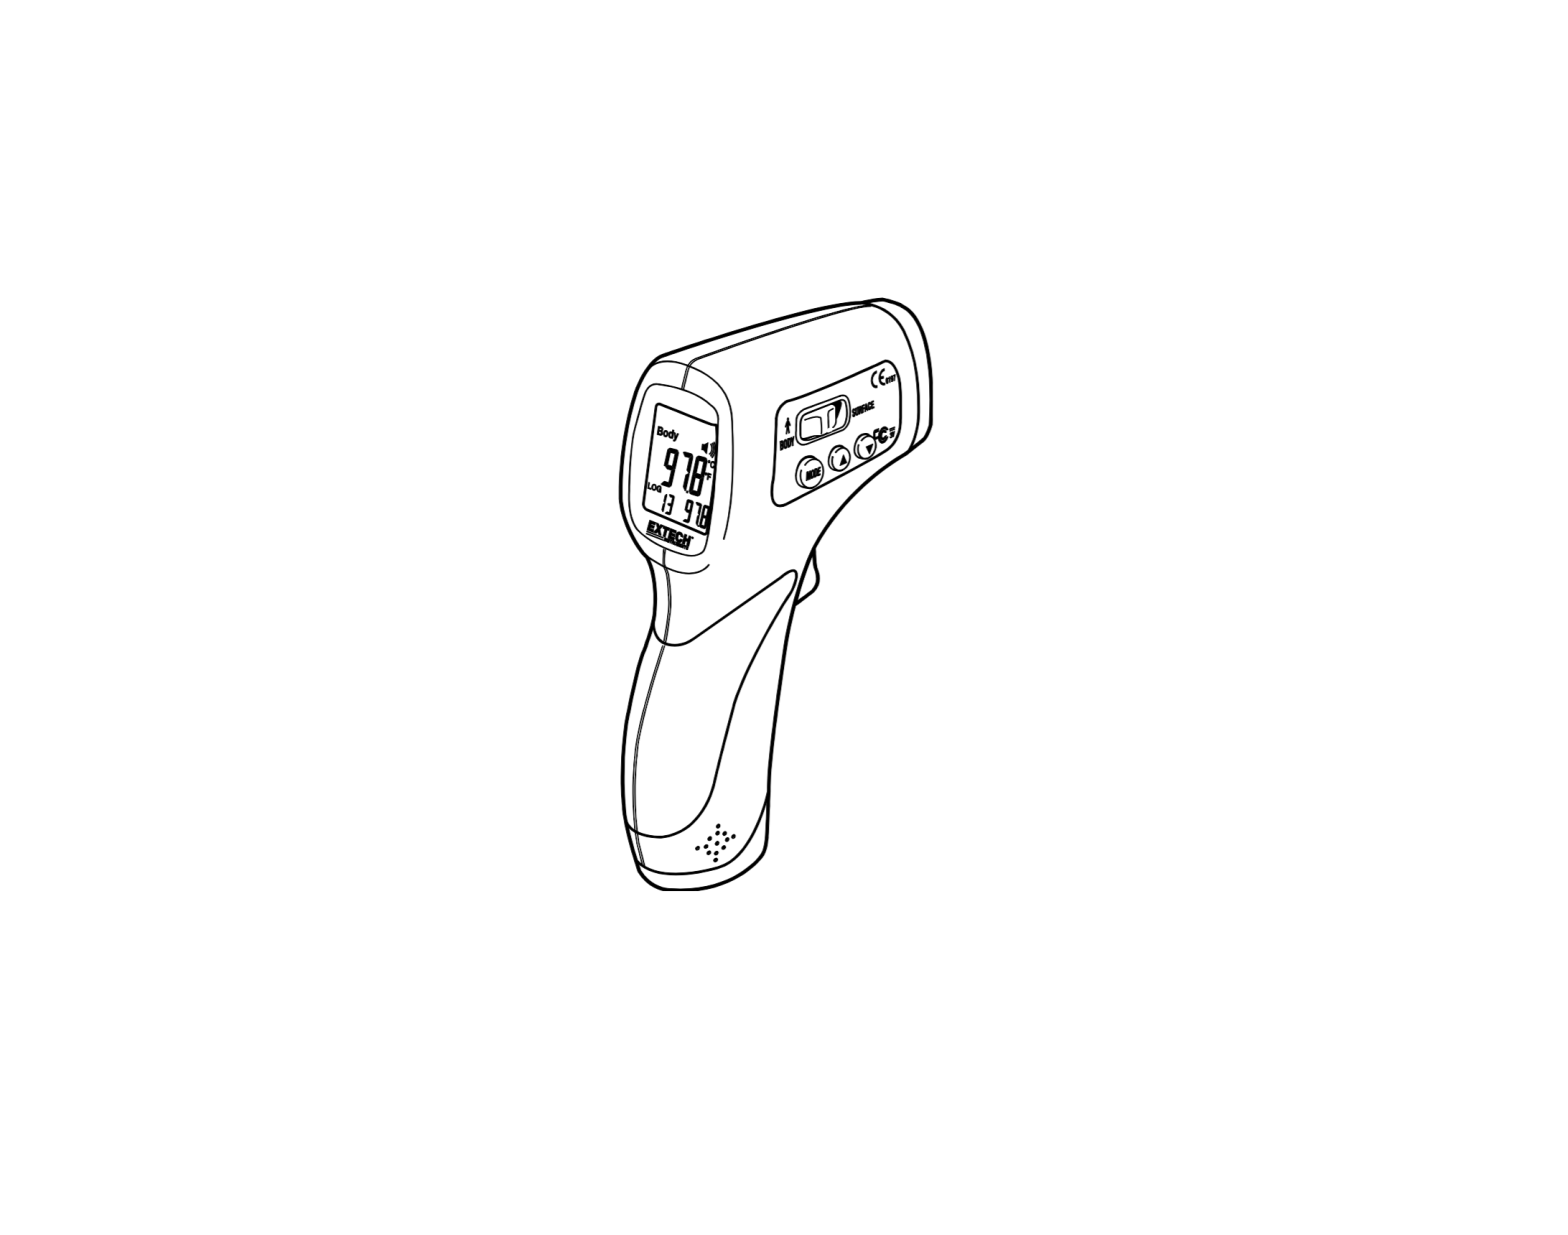 EXTECH Non-contact Forehead IR Thermometer IR200 User Manual